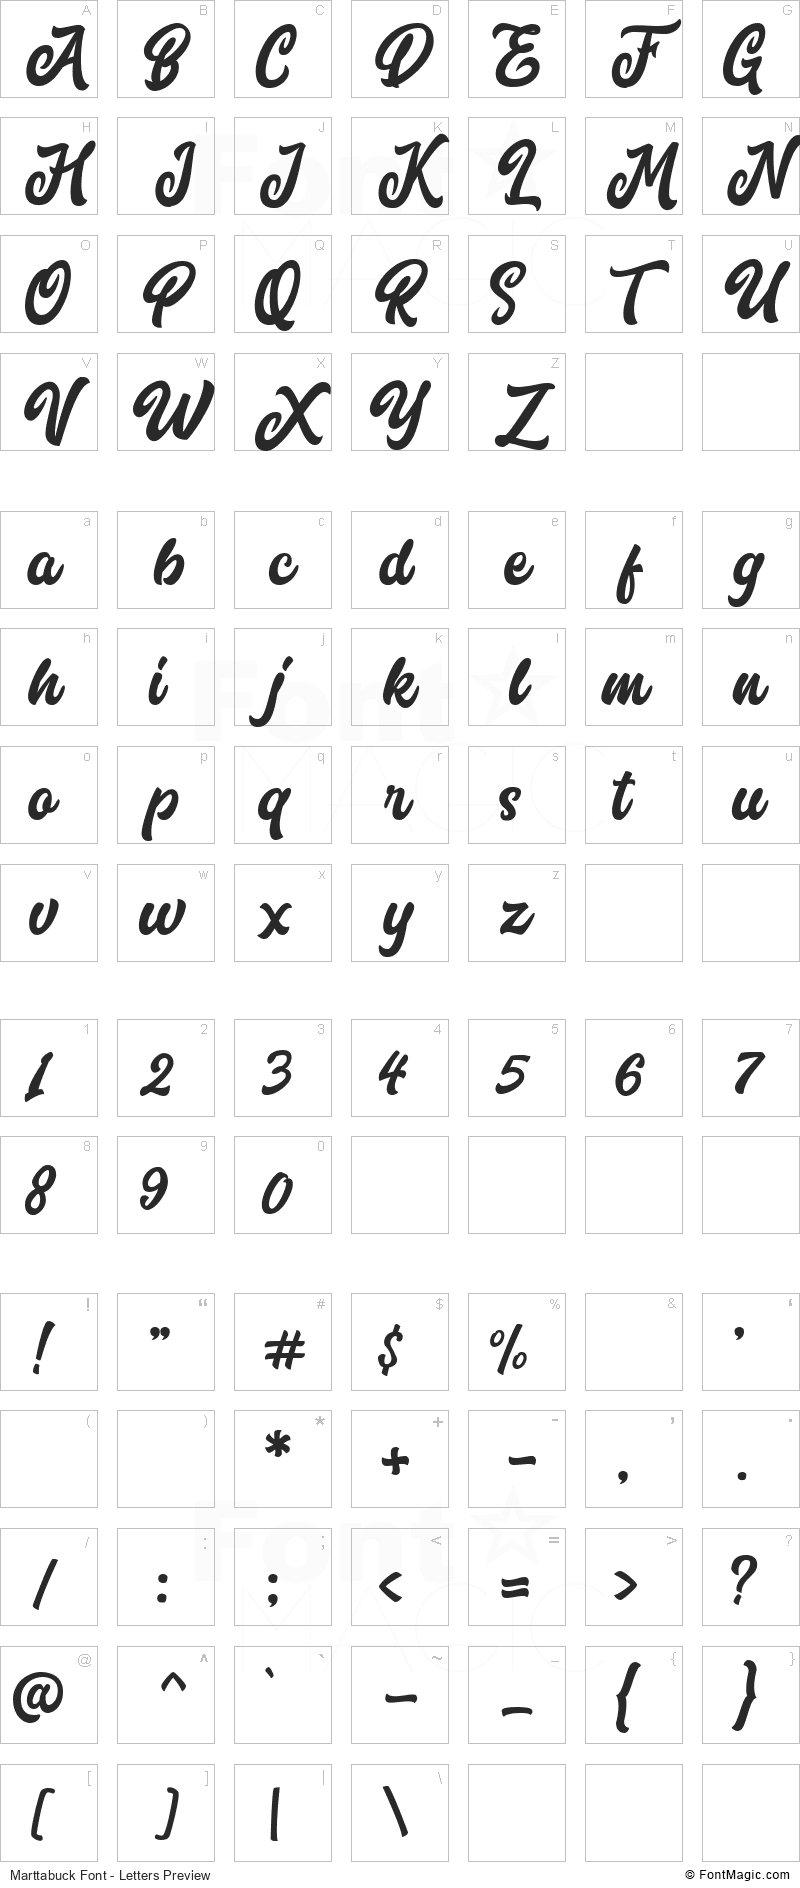 Marttabuck Font - All Latters Preview Chart